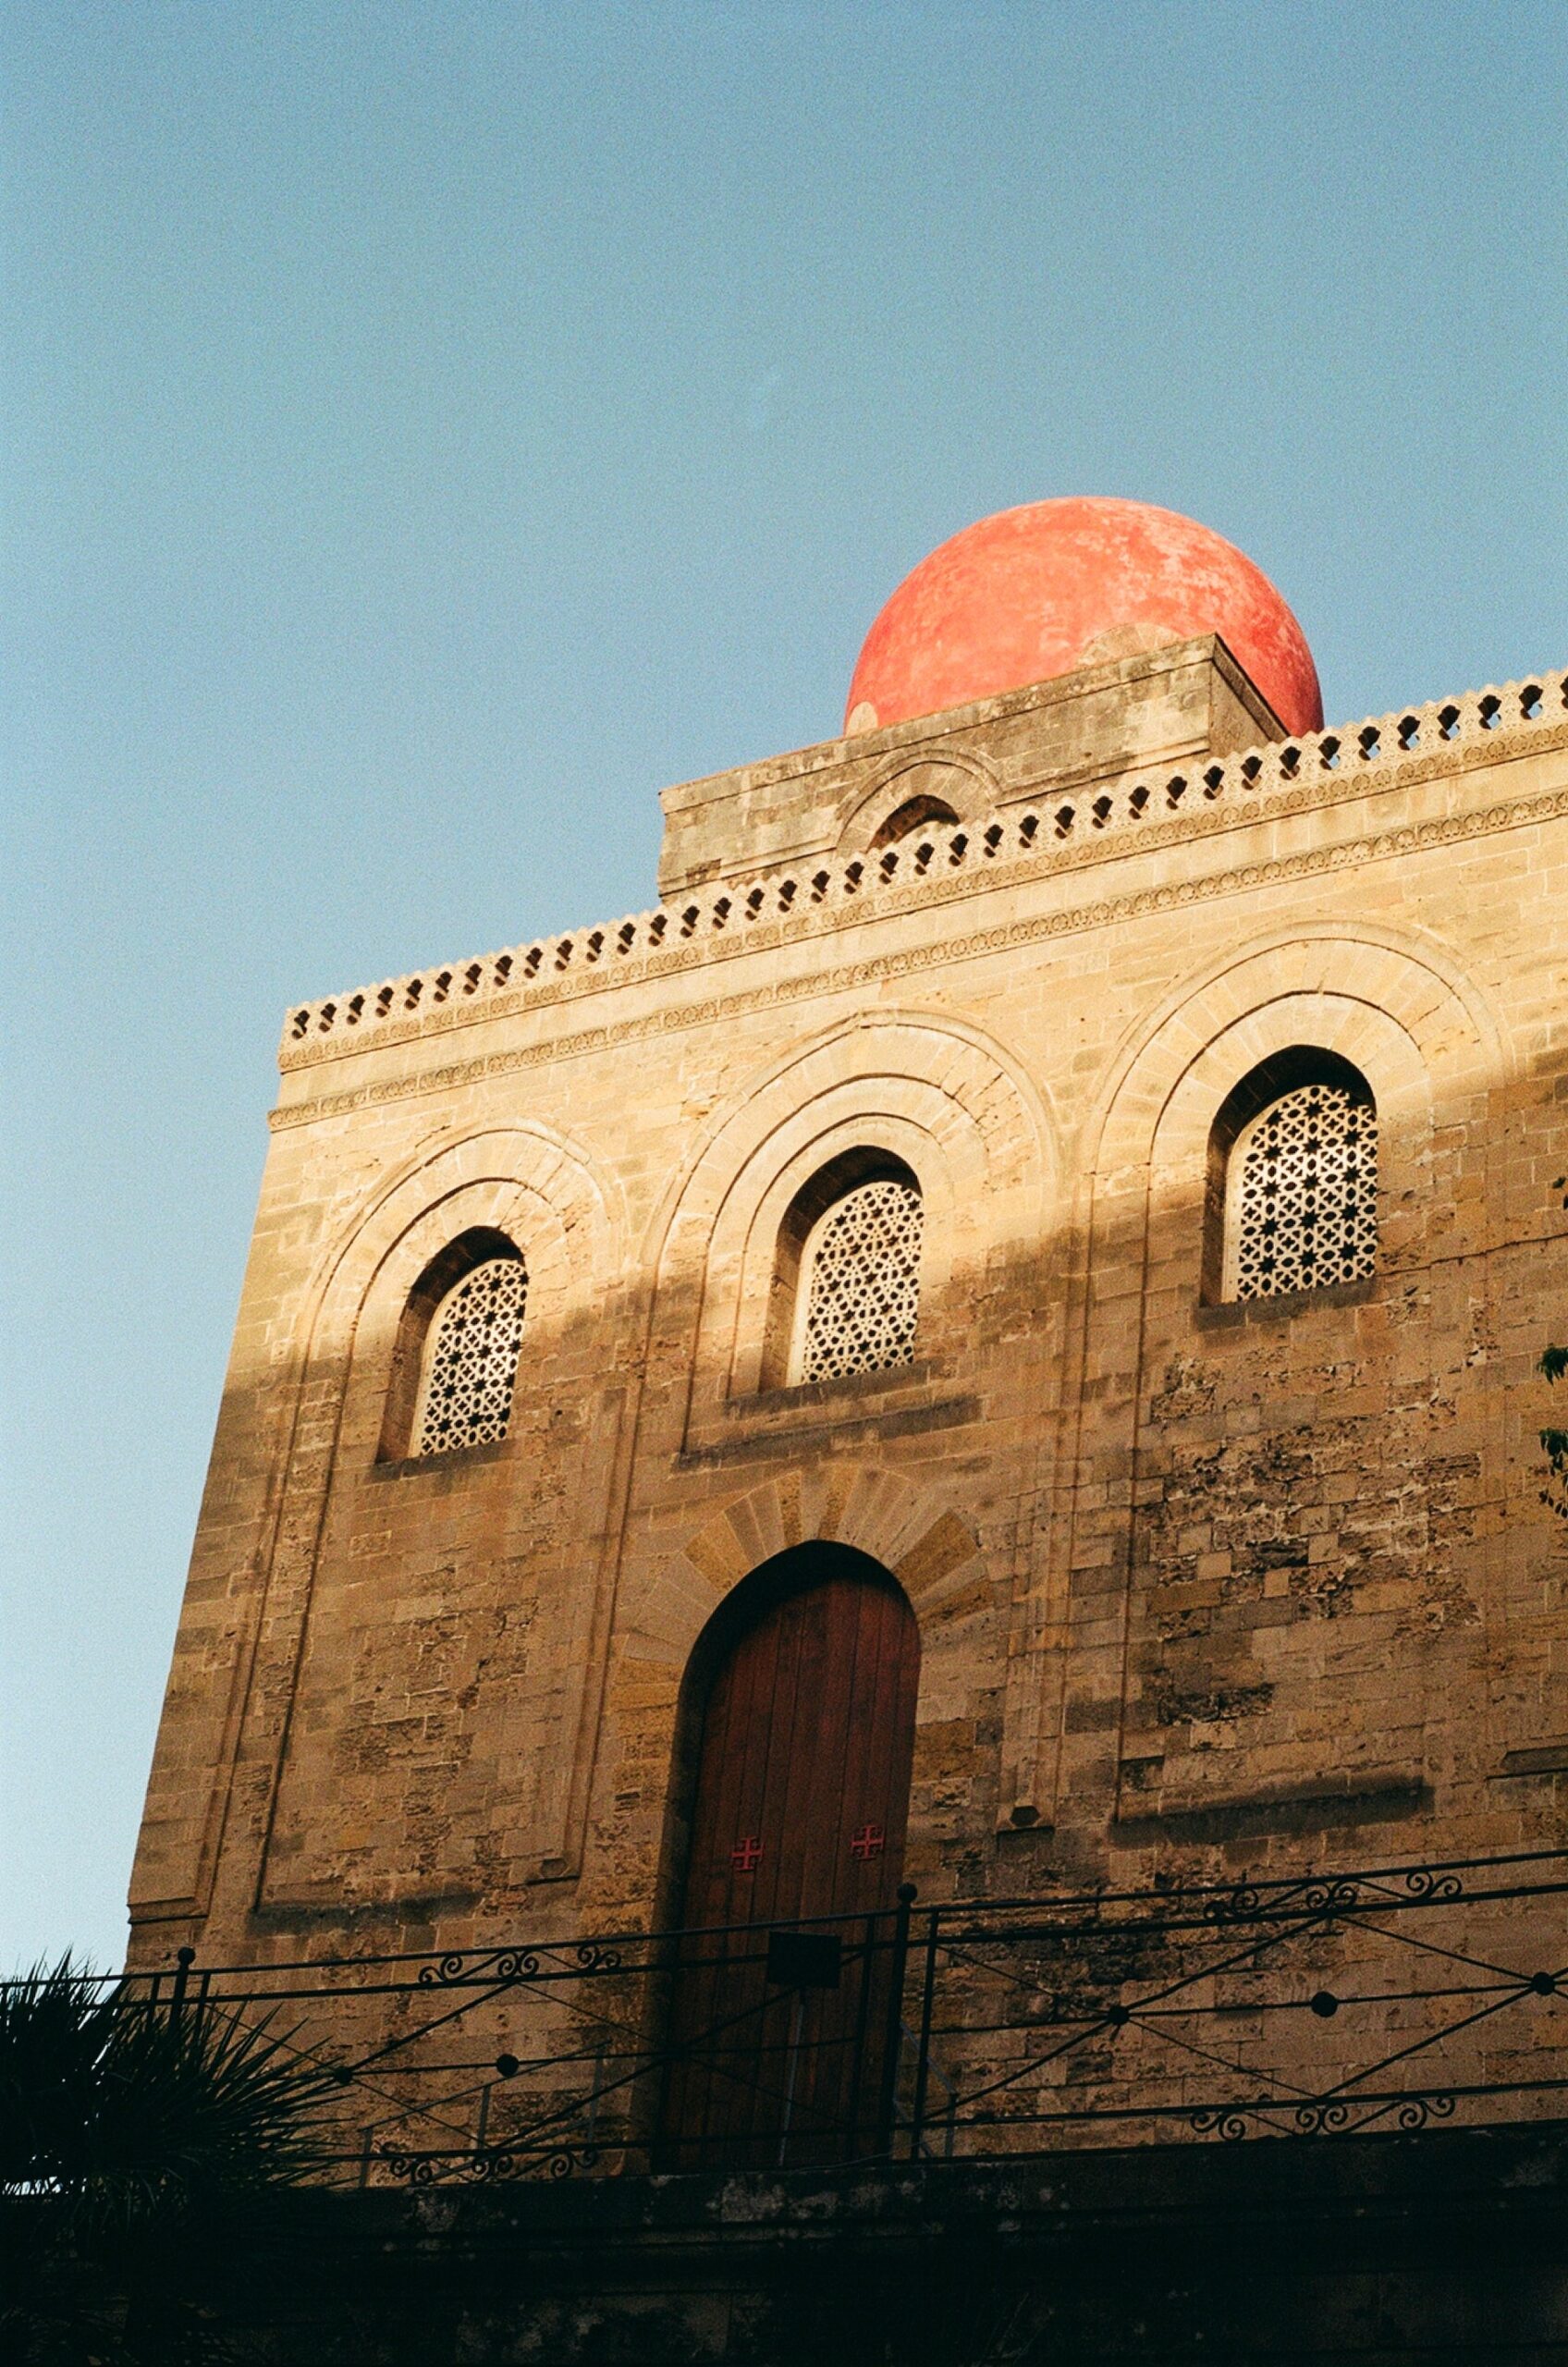 The mosque of Palermo